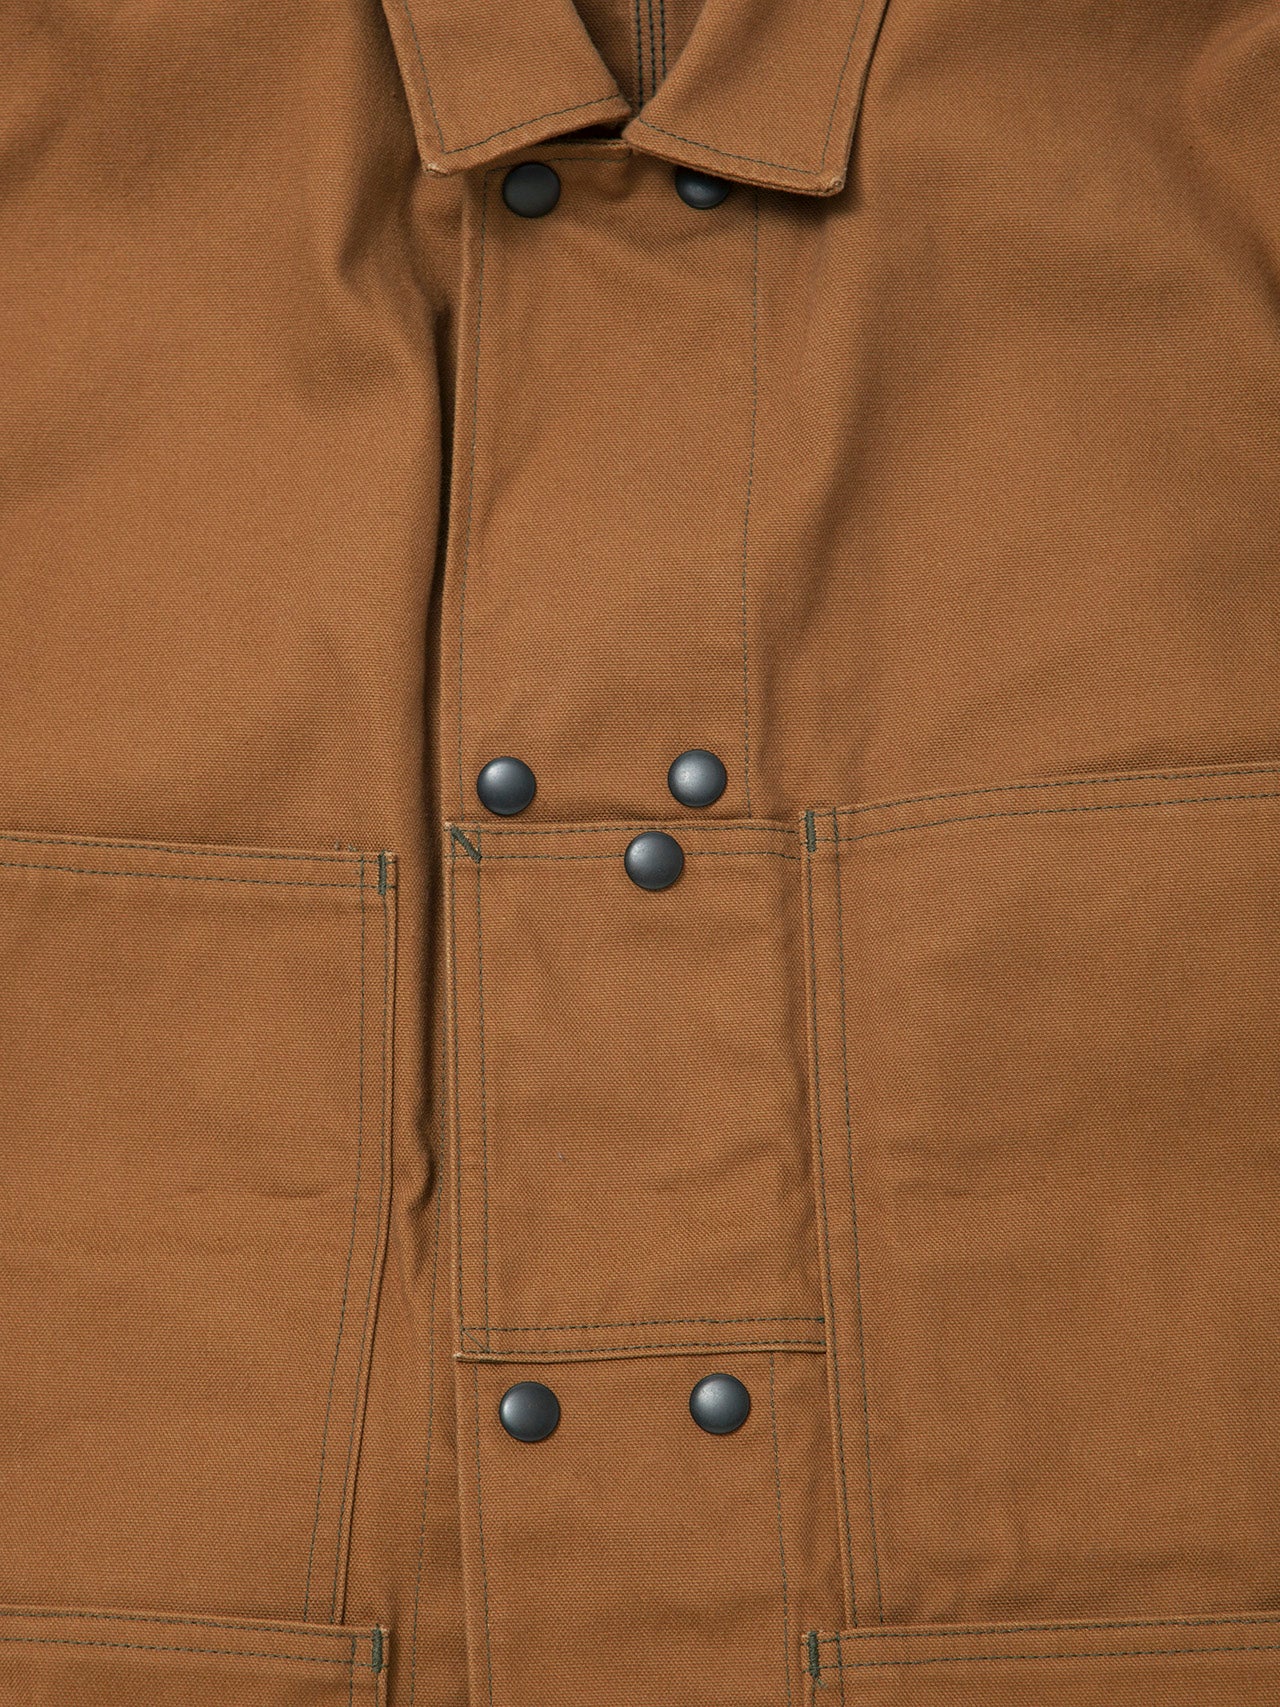 CJ123A-1 - A-1 CLOTHING × THE CORONA UTILITY・Cross Town Jacket / Cotton Duck - Brown